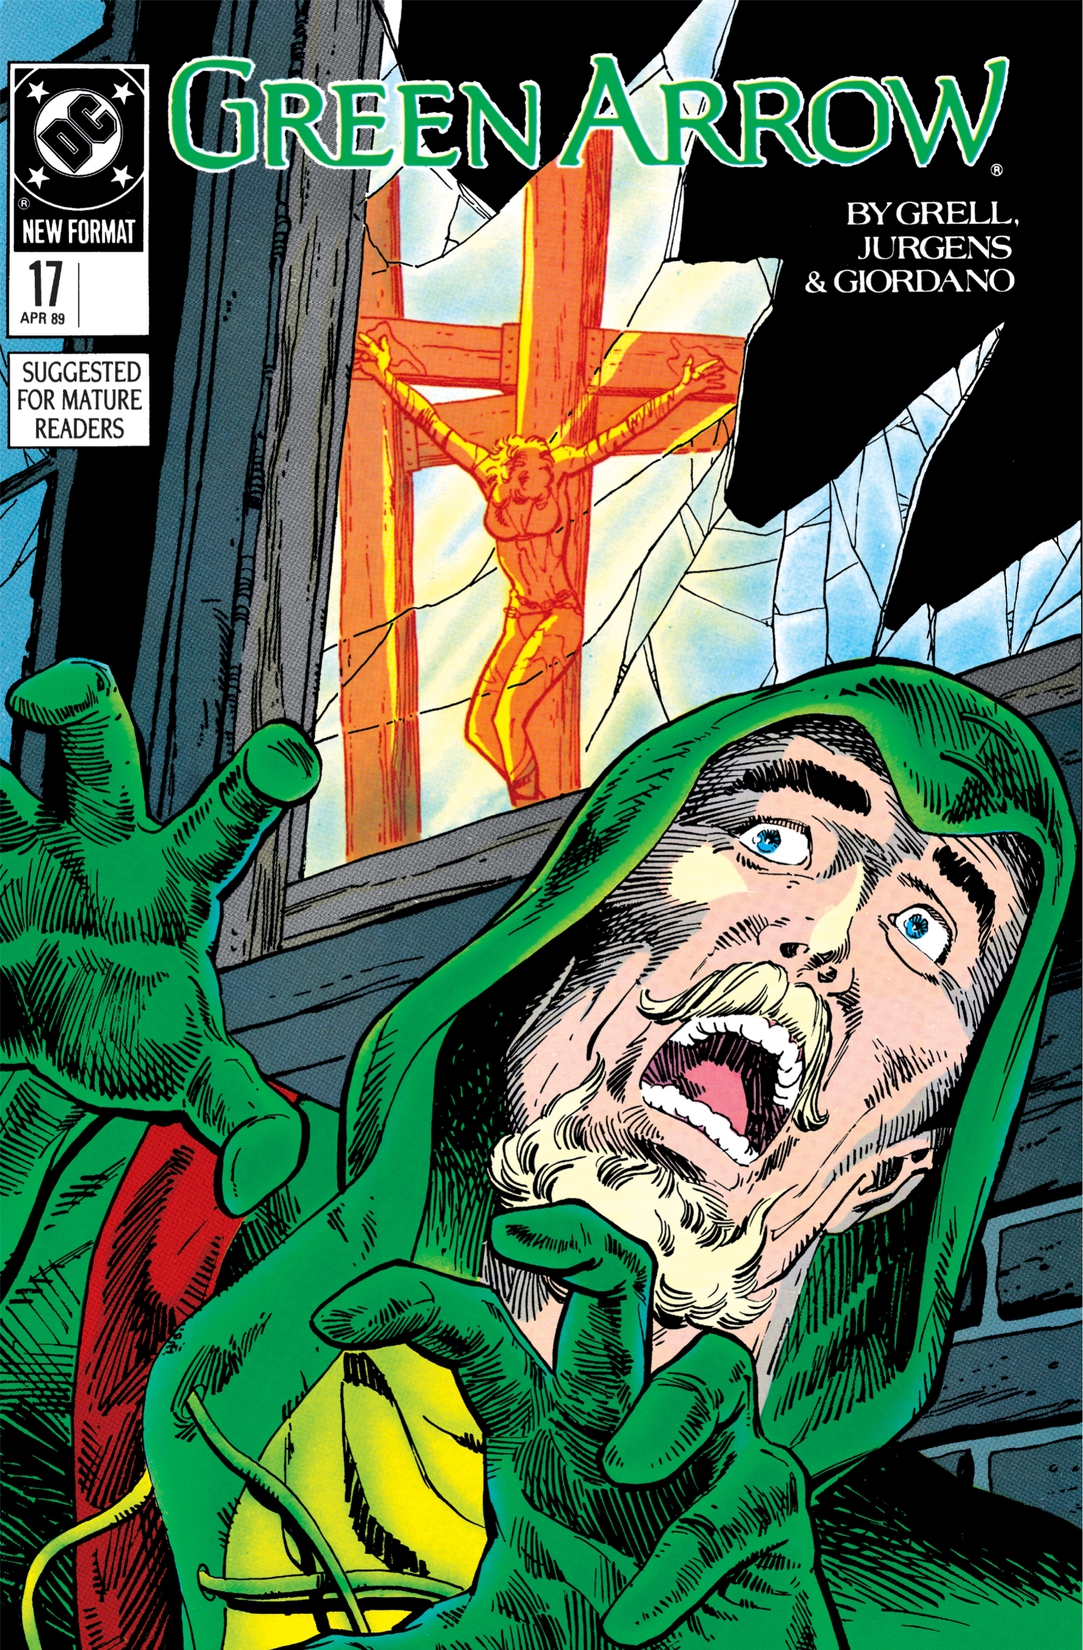 Green Arrow (1987-) #17 preview images